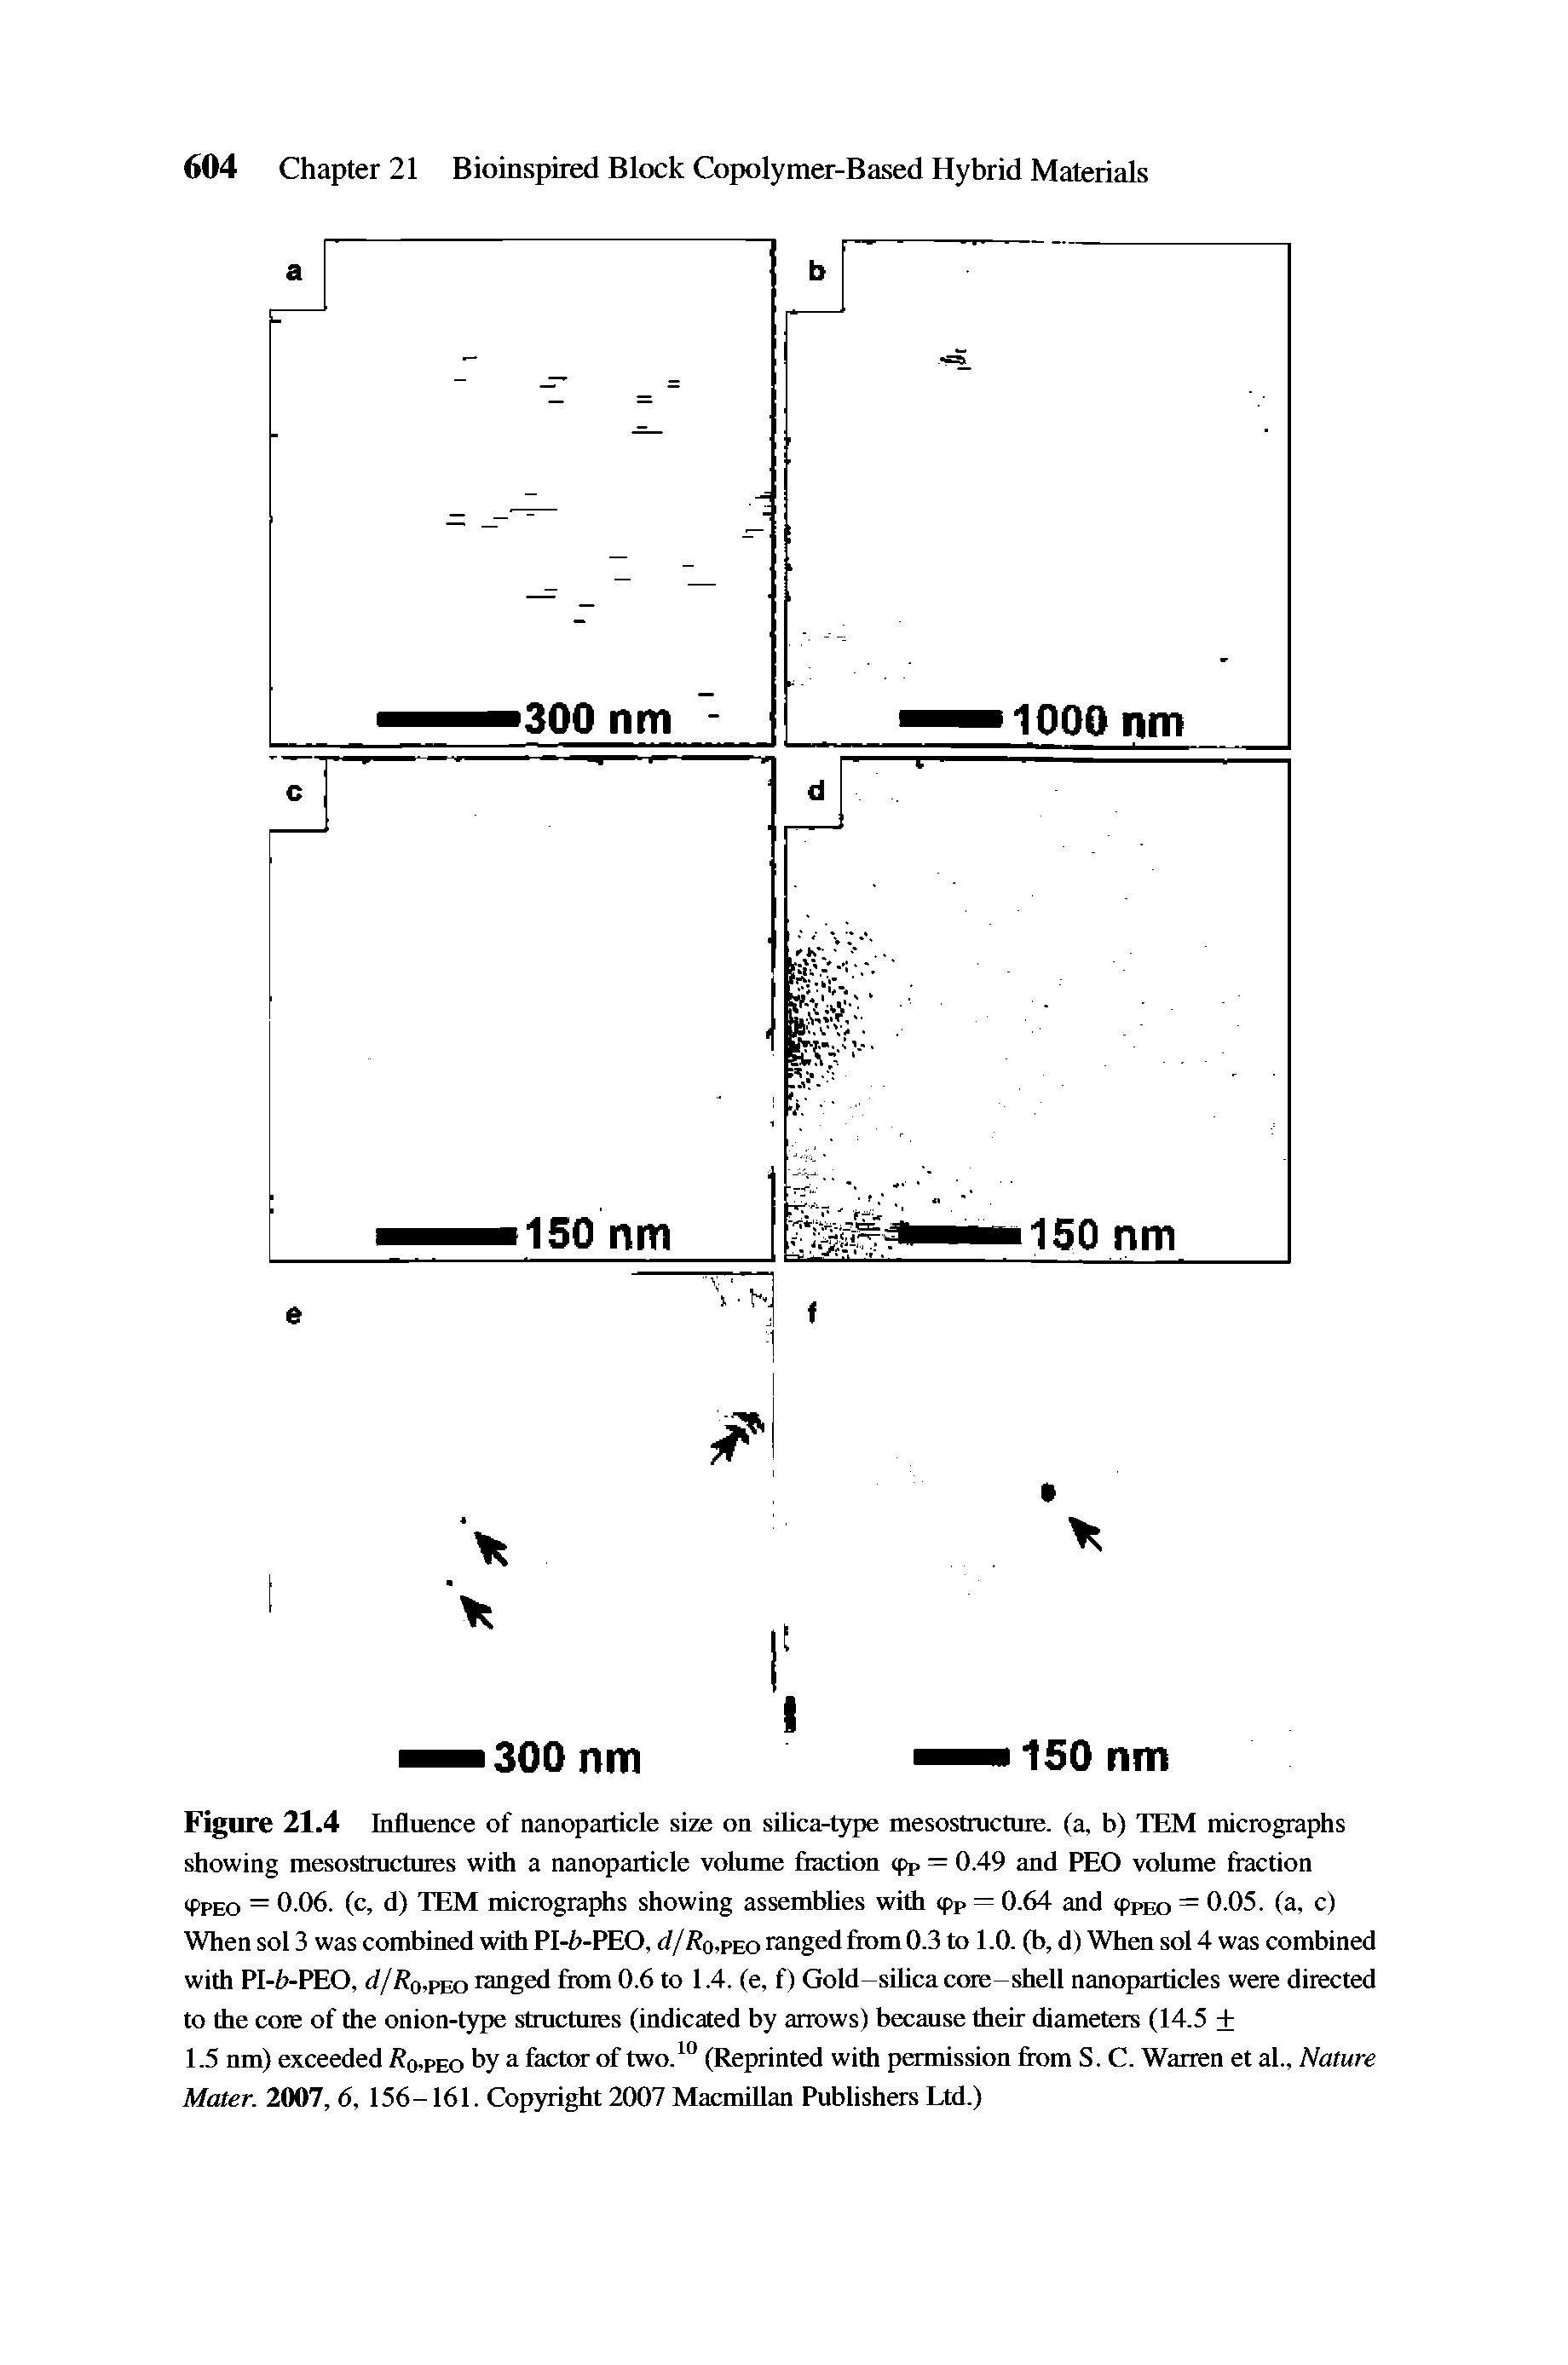 Figure 21.4 Influence of nanoparticle size on silica-type mesostructuie. (a, b) TEM micrographs showing mesostructuies with a nanoparticle volume fraction <pp = 0.49 and PEO volume fraction ifPEO = 0.06. (c, d) TEM micrographs showing assemblies with <pP = 0.64 and <pPEO = 0.05. (a, c) When sol 3 was combined with PI-b-PEO, d jRq.peo ranged from 0.3 to 1.0. (b, d) When sol 4 was combined with PI-b-PEO, (/// o,peo ranged from 0.6 to 1.4. (e, f) Gold-silica core-shell nanoparticles were directed to the core of the onion-type structures (indicated by arrows) because their diameters (14.5 +...